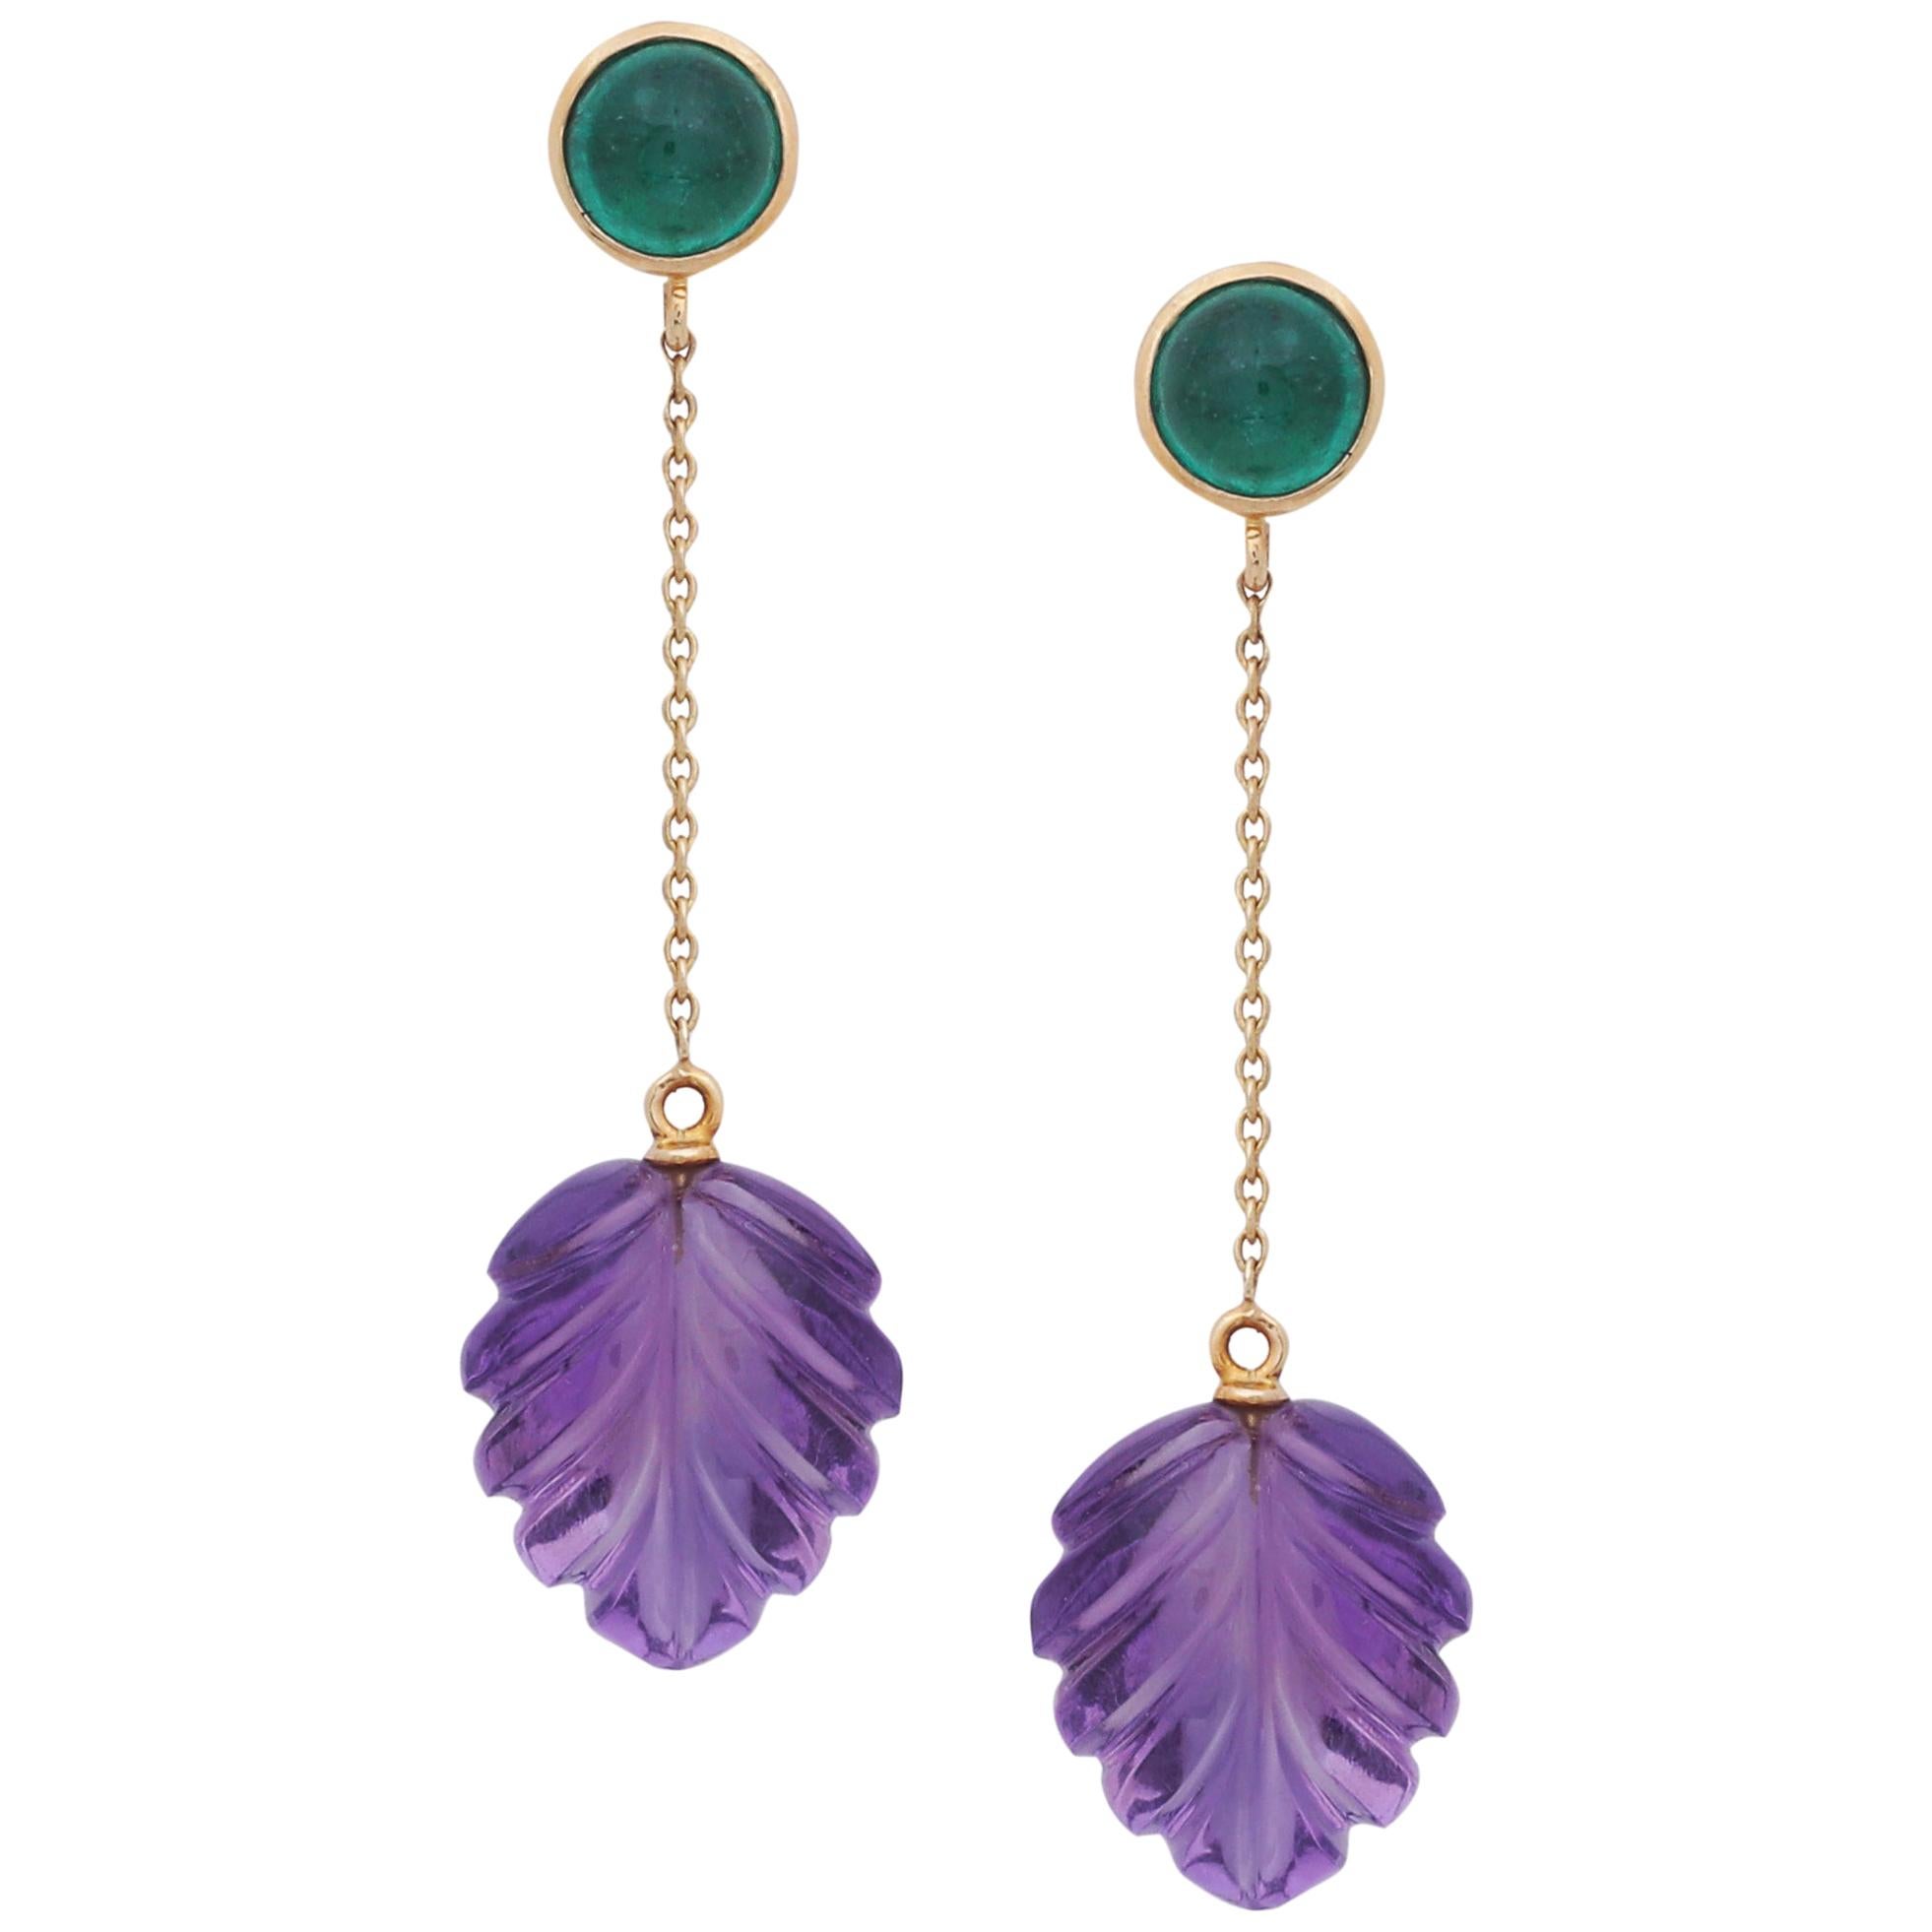 Emerald Cabochon and Amethyst Carved Leaves Earrings Handmade in 18K Yellow Gold